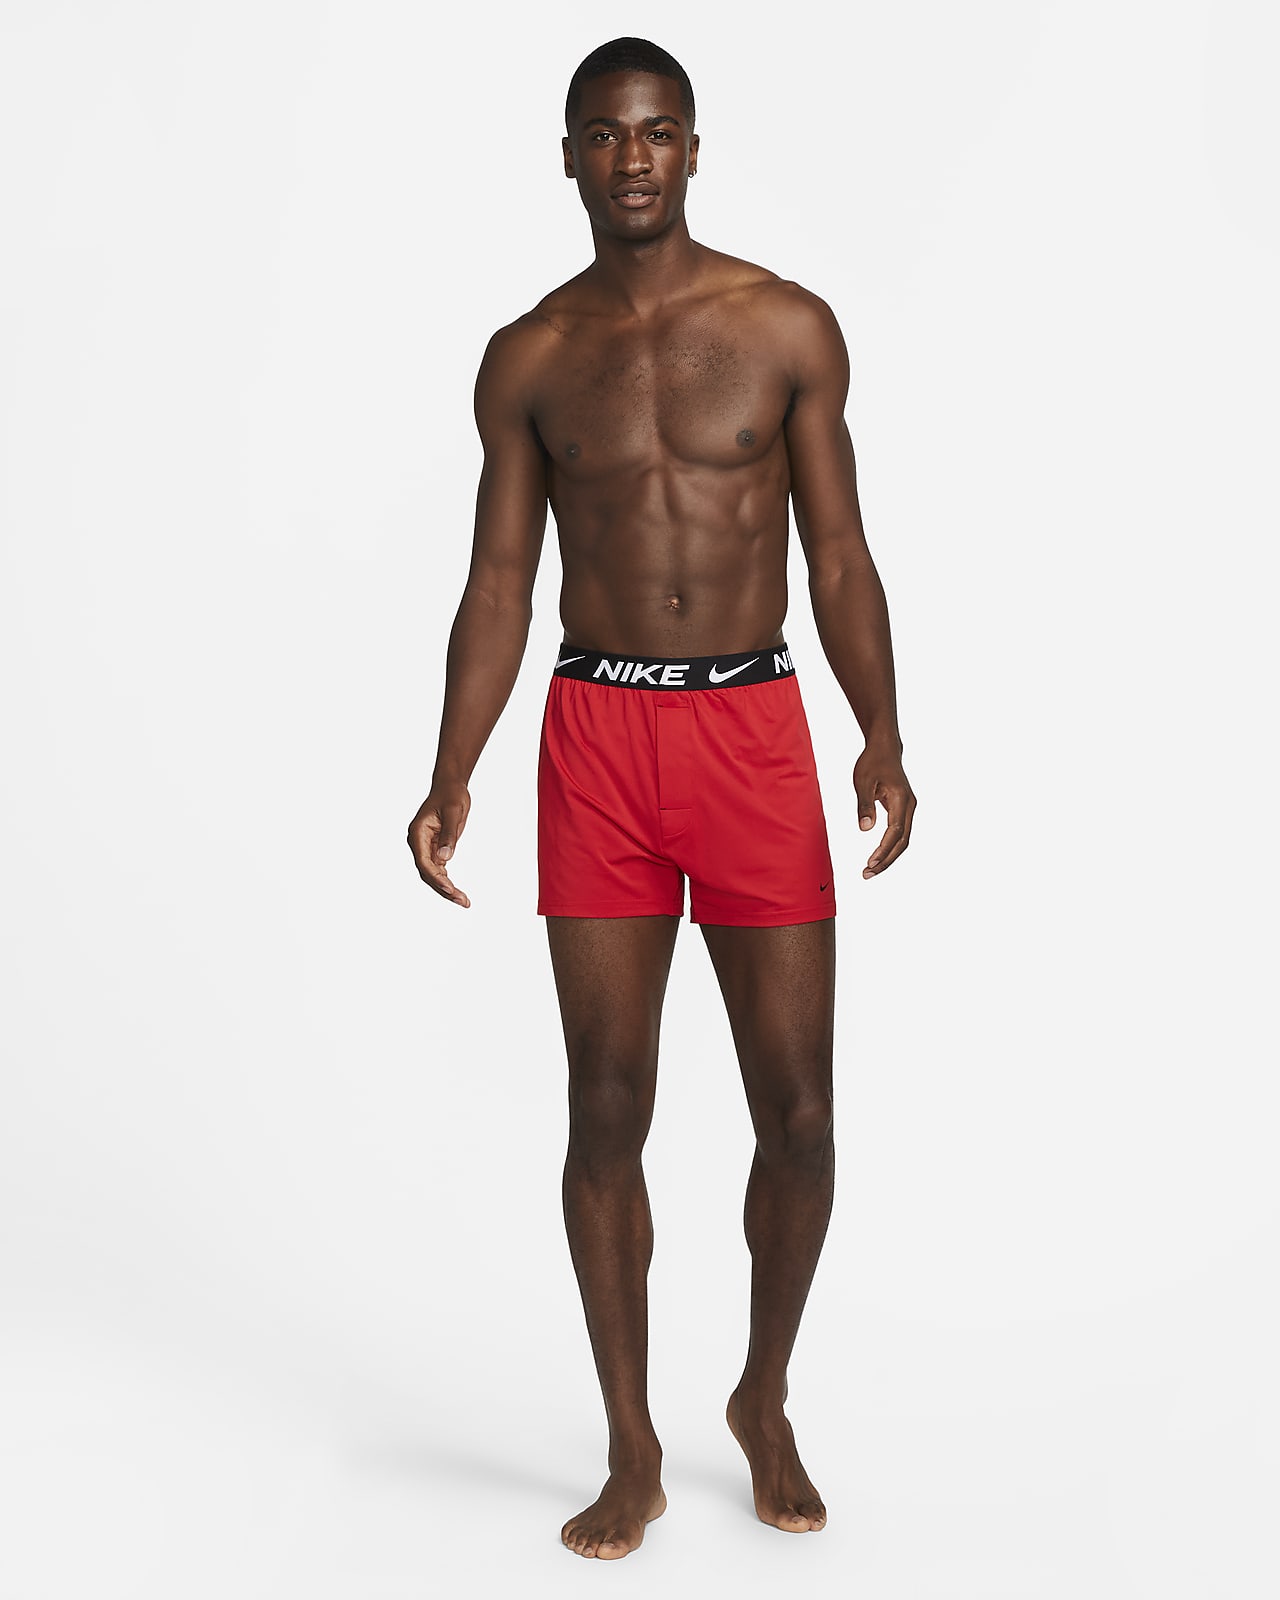 Knit Boxers 3-Pack